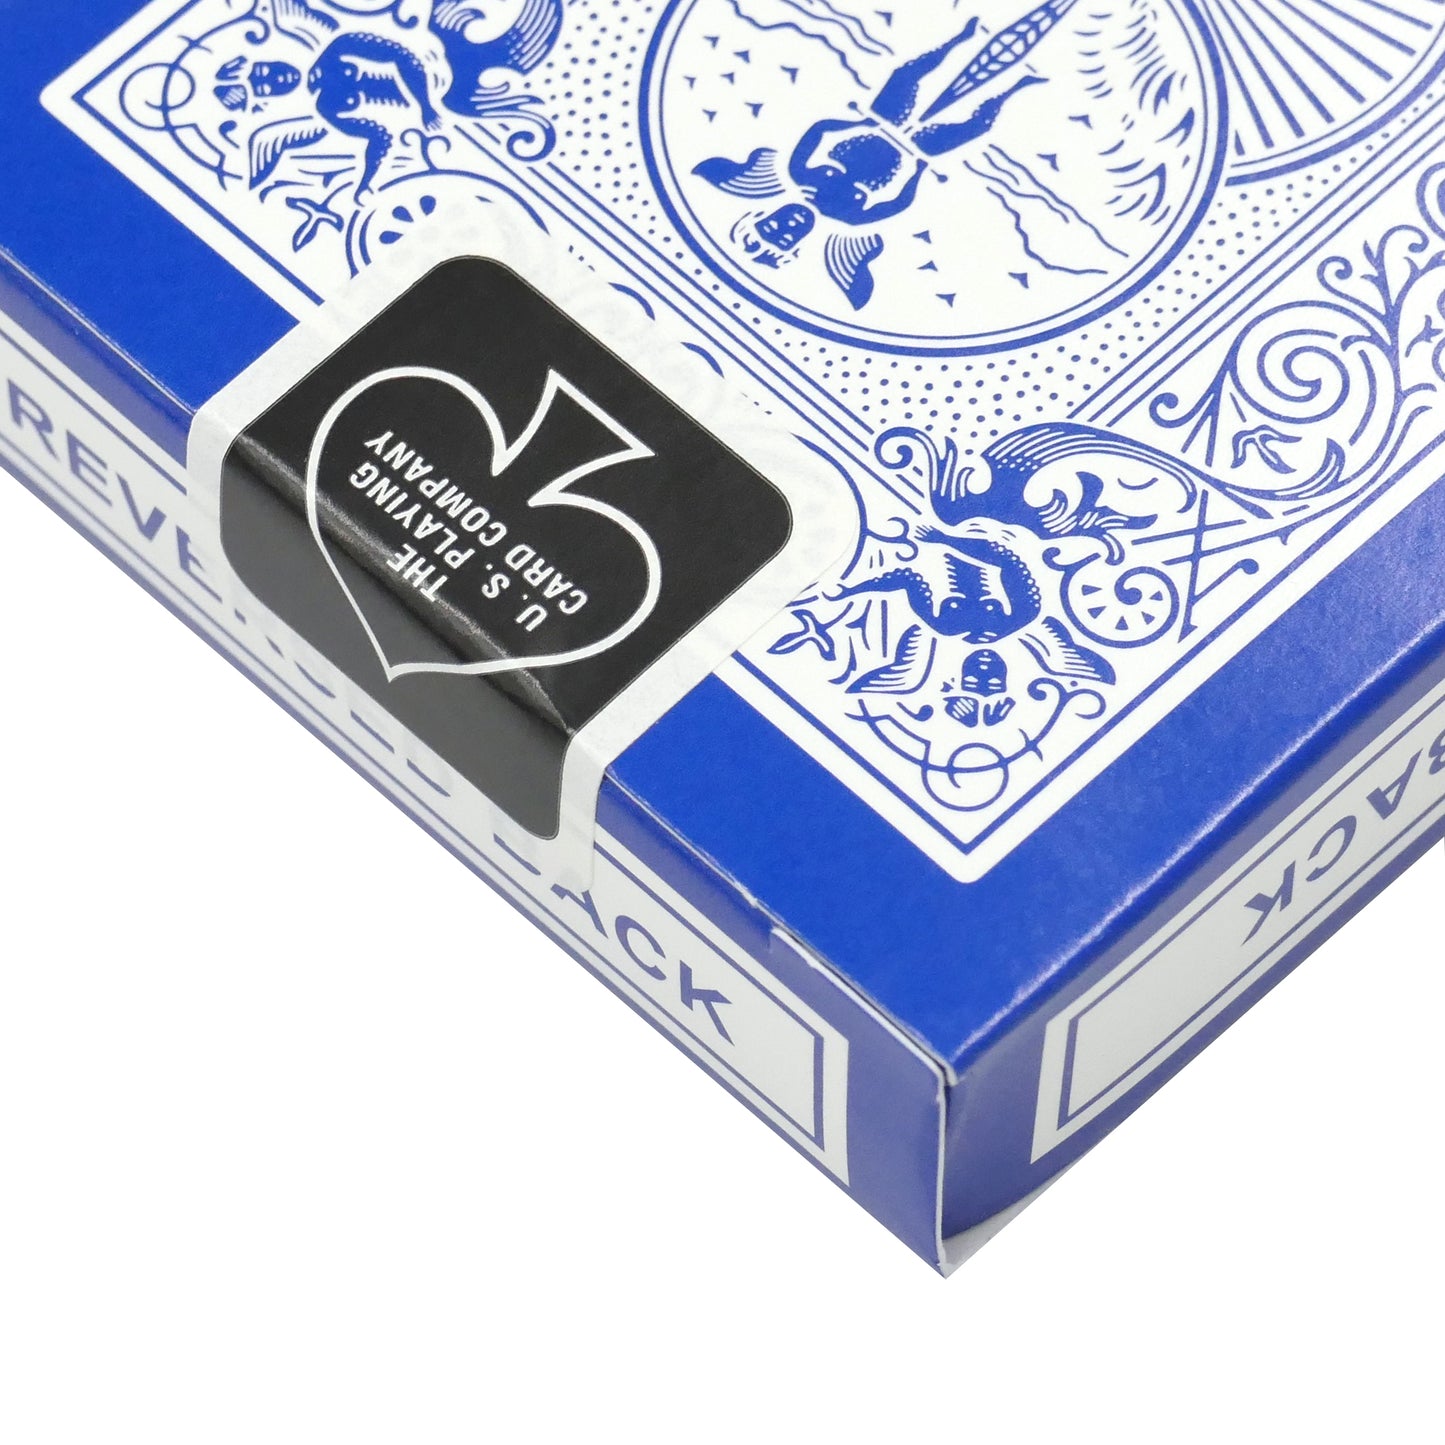  Blank Playing Cards Bicycle Deck - Blue Backs : Toys & Games